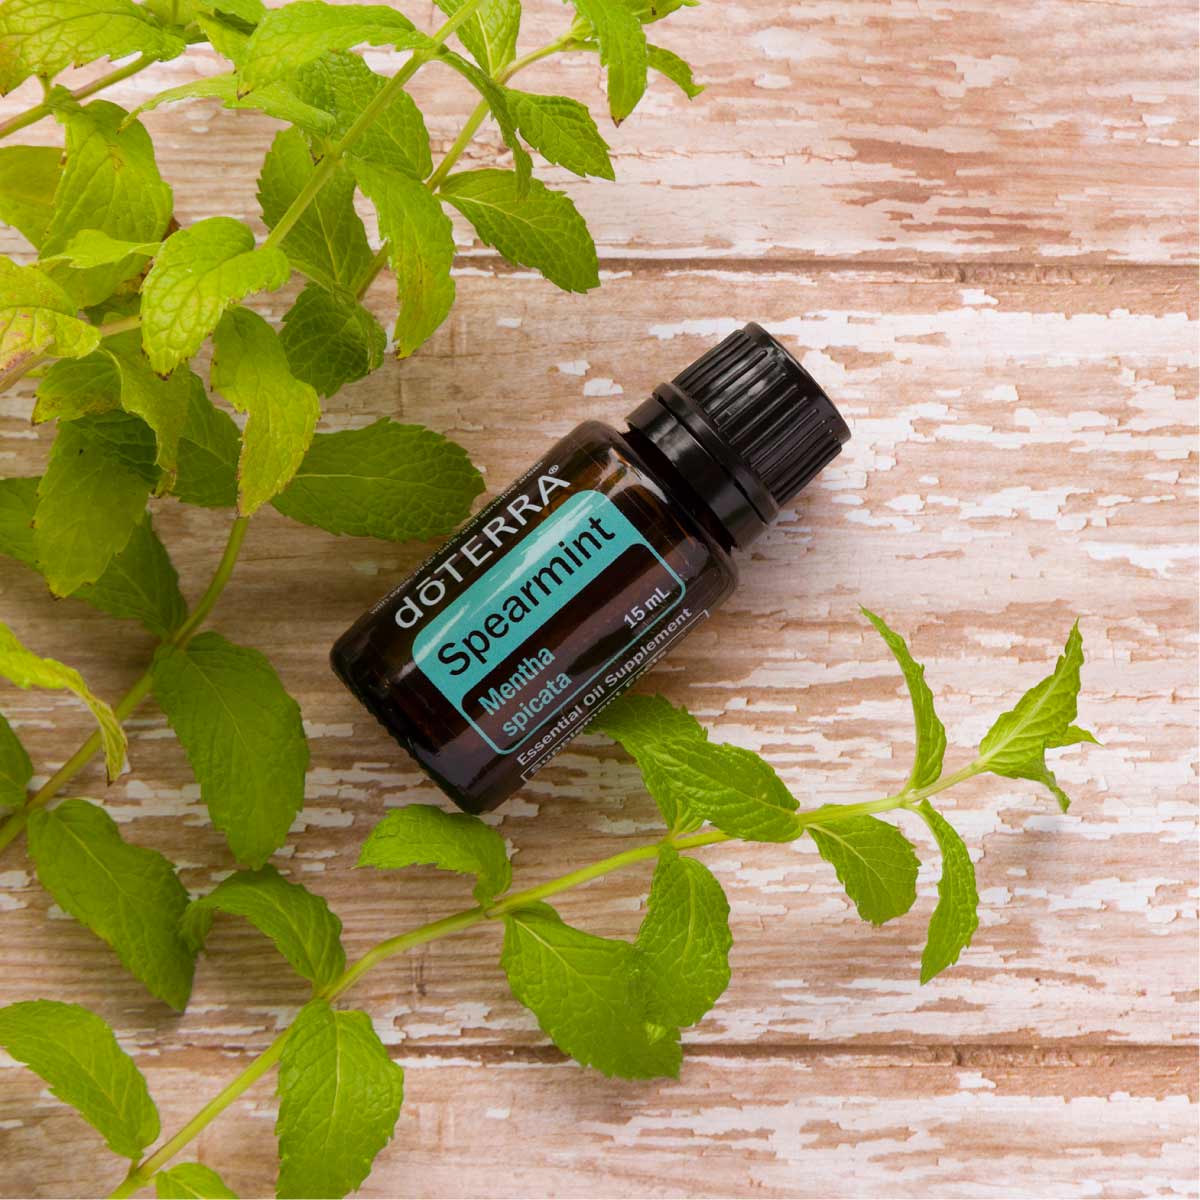 Spearmint essential oil bottle and green leaves from a spearmint plant. Where can I buy Spearmint essential oil? Make sure to always buy pure, high-quality essential oils. Visit the Spearmint oil page on doterra.com to learn more.